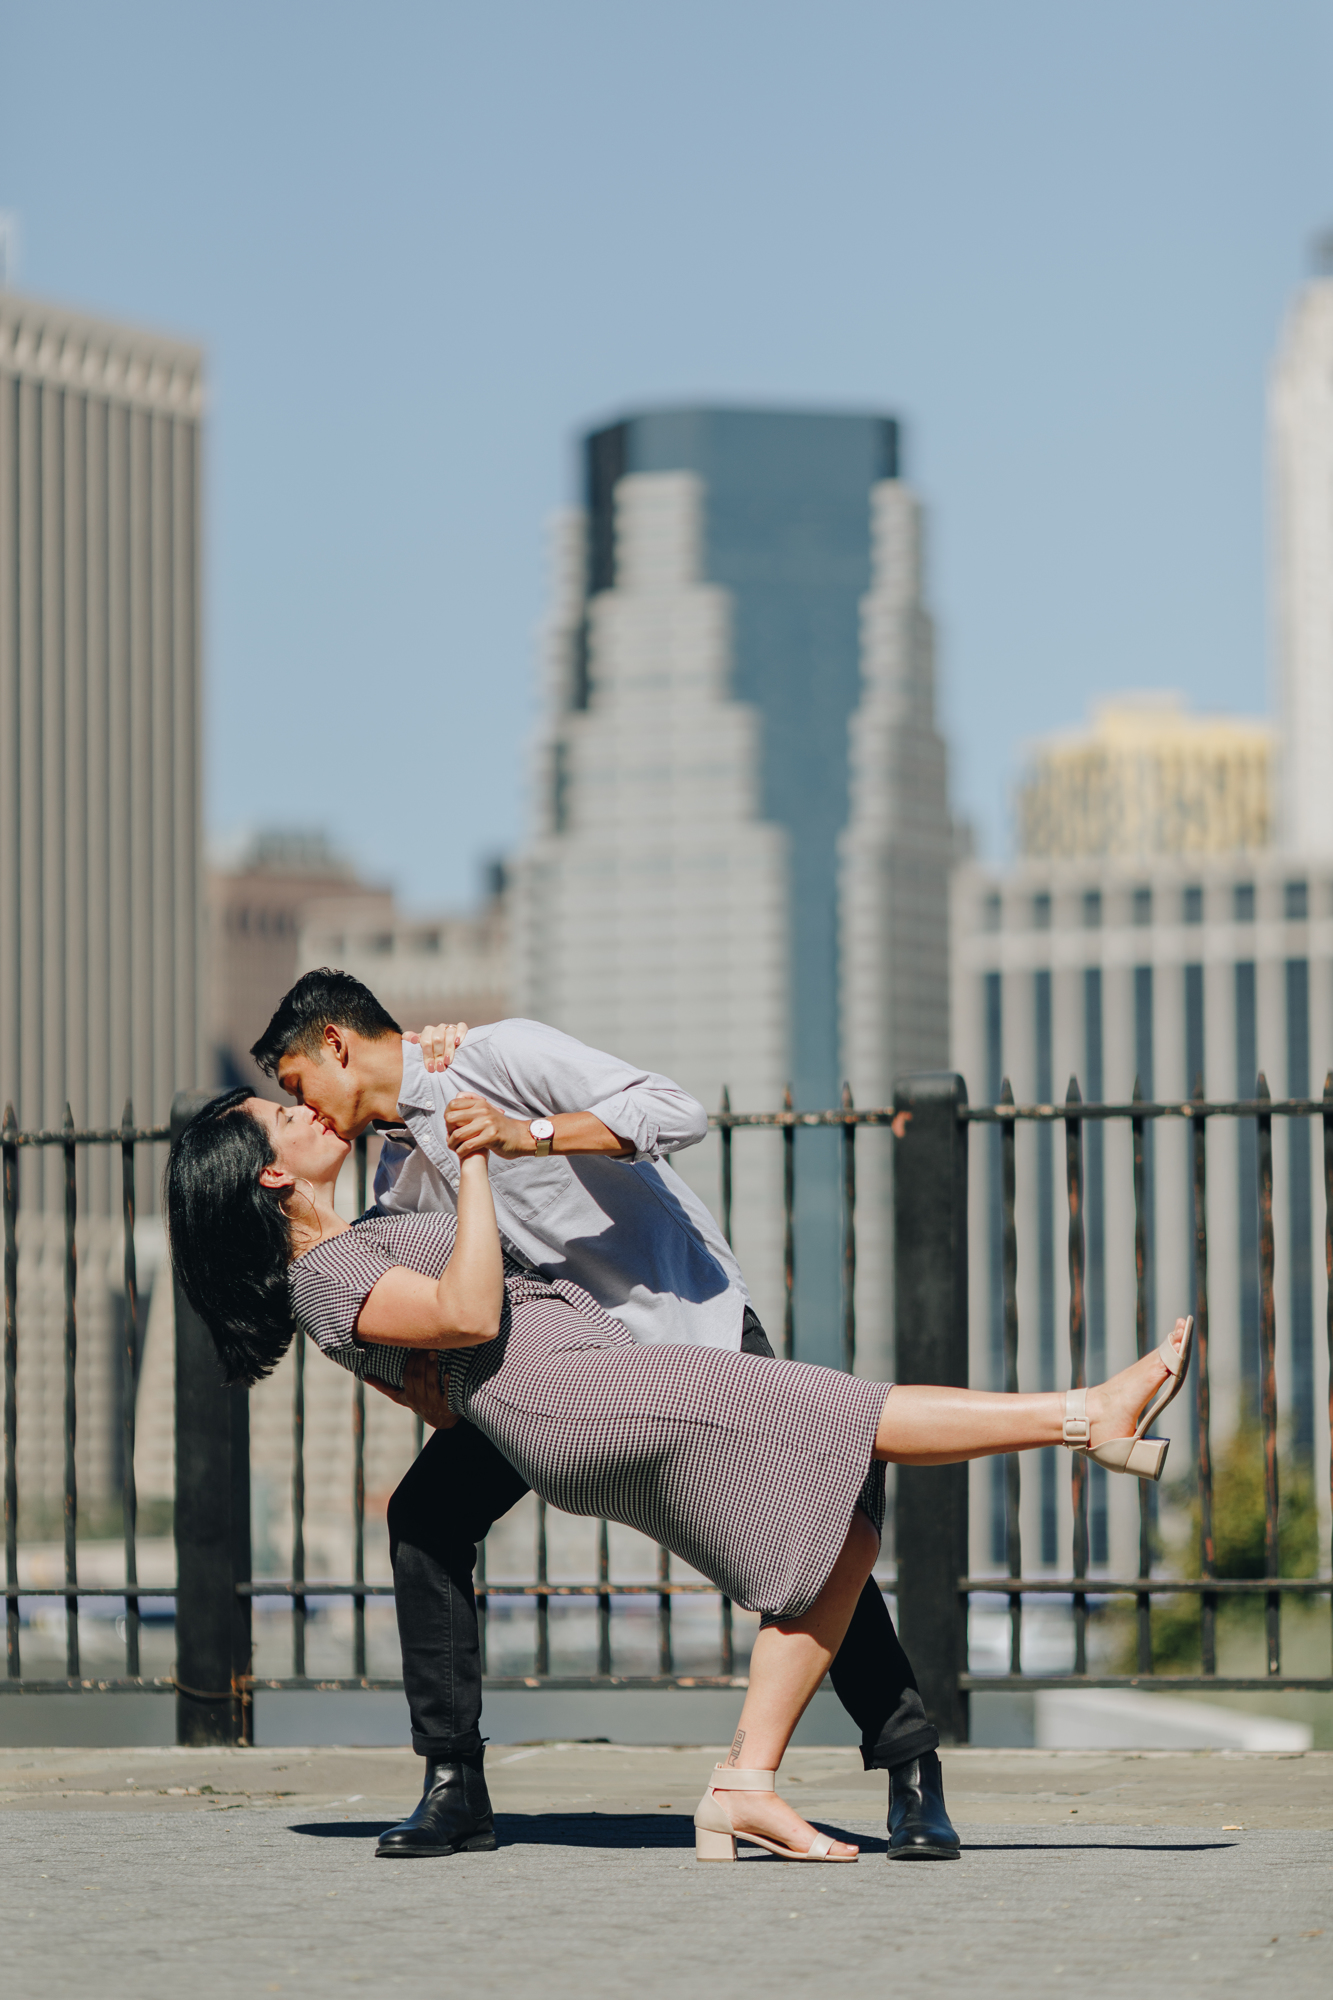 Timeless Brooklyn Heights Promenade Engagement Photos in Summery New York